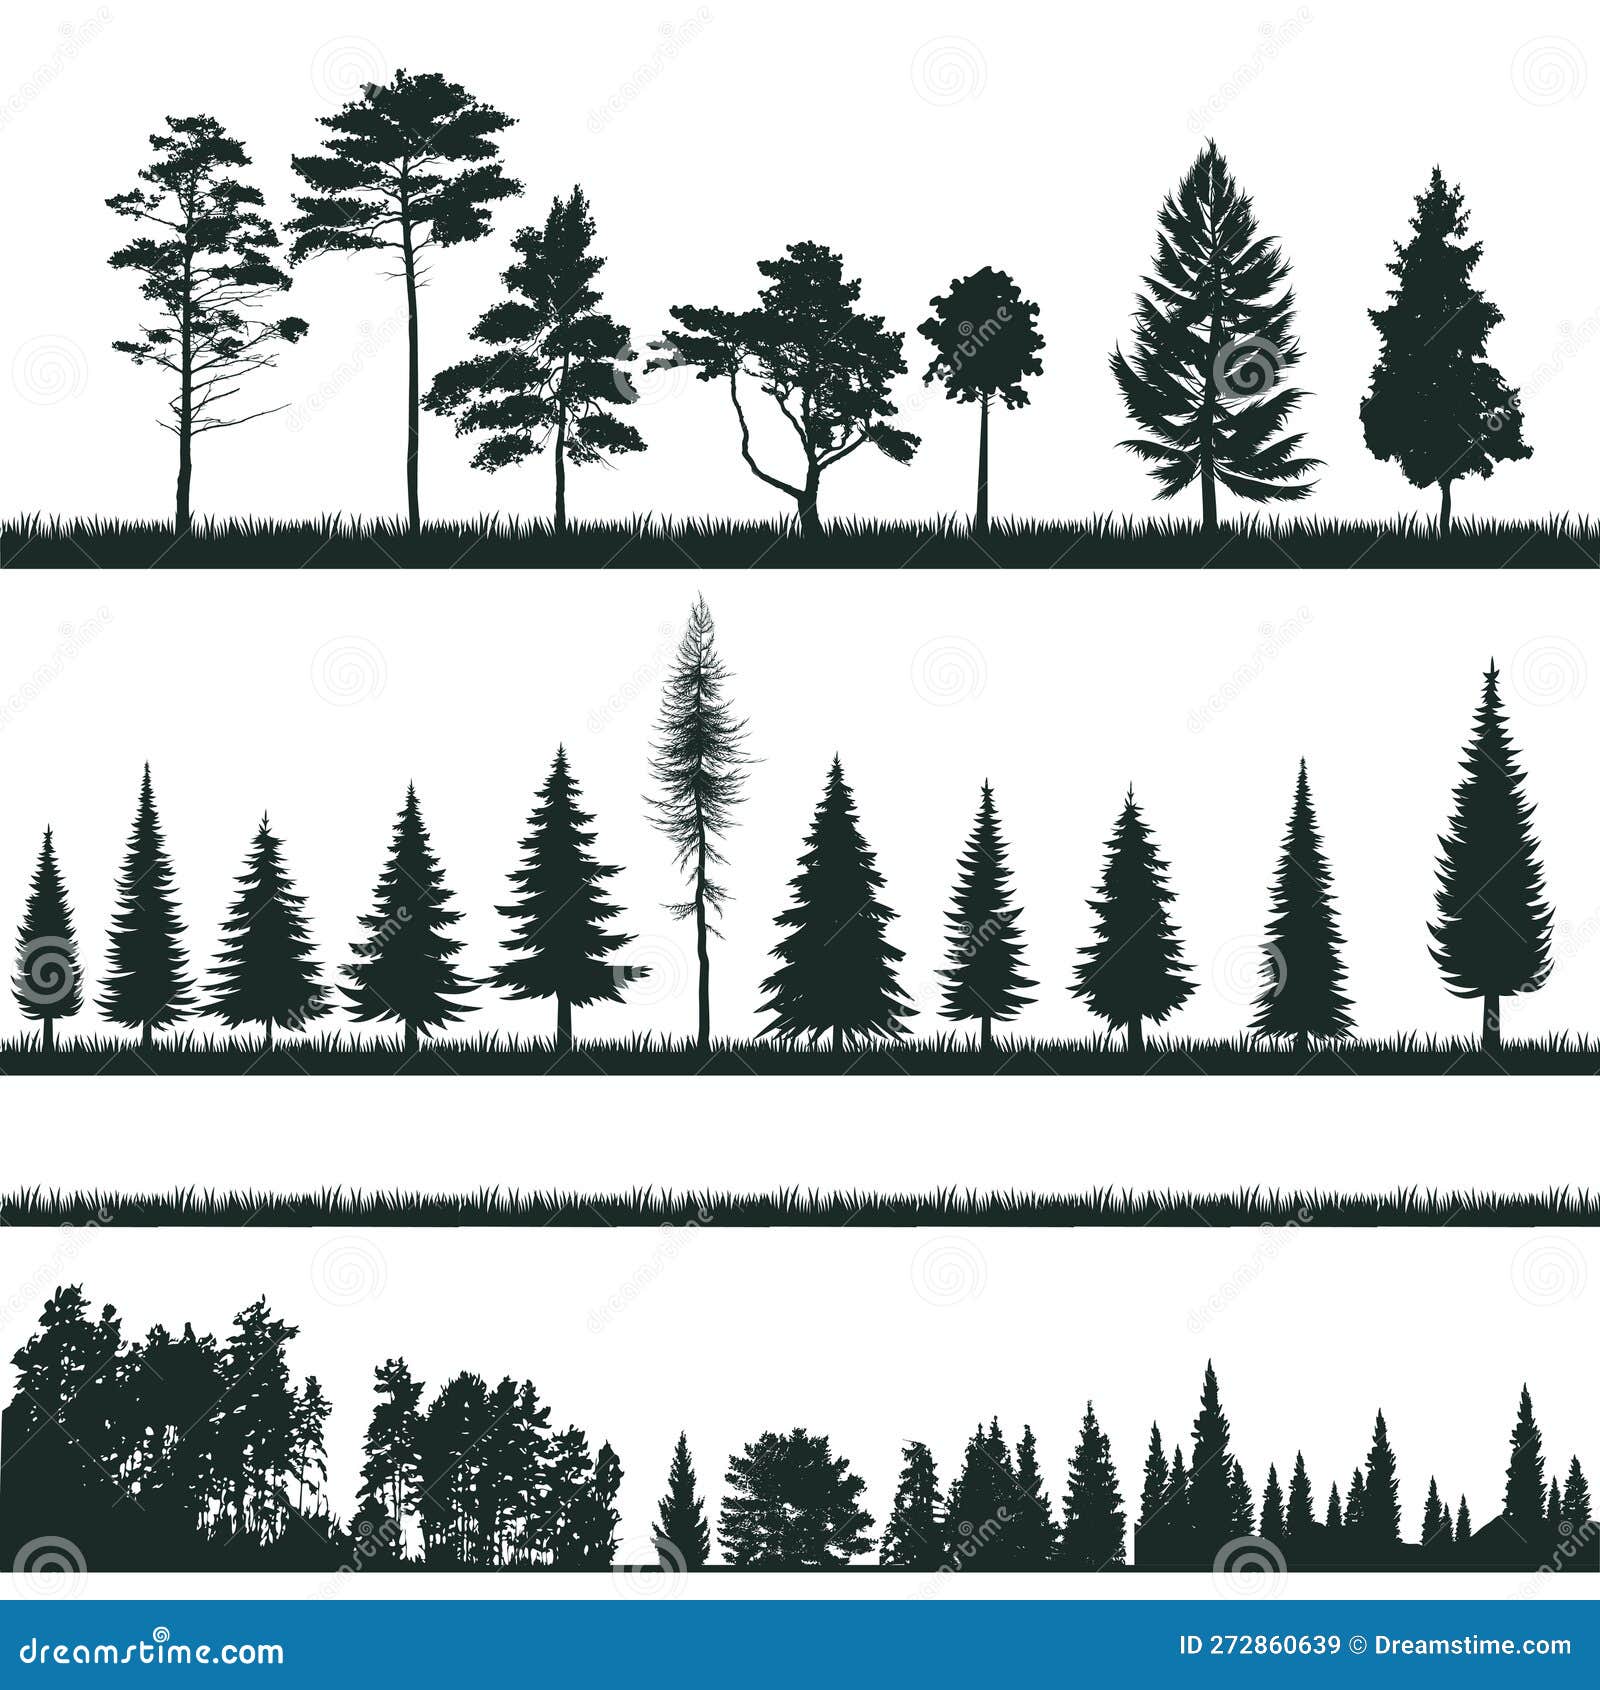 groups of tree silhouettes - conifers, shrubs, grass - s